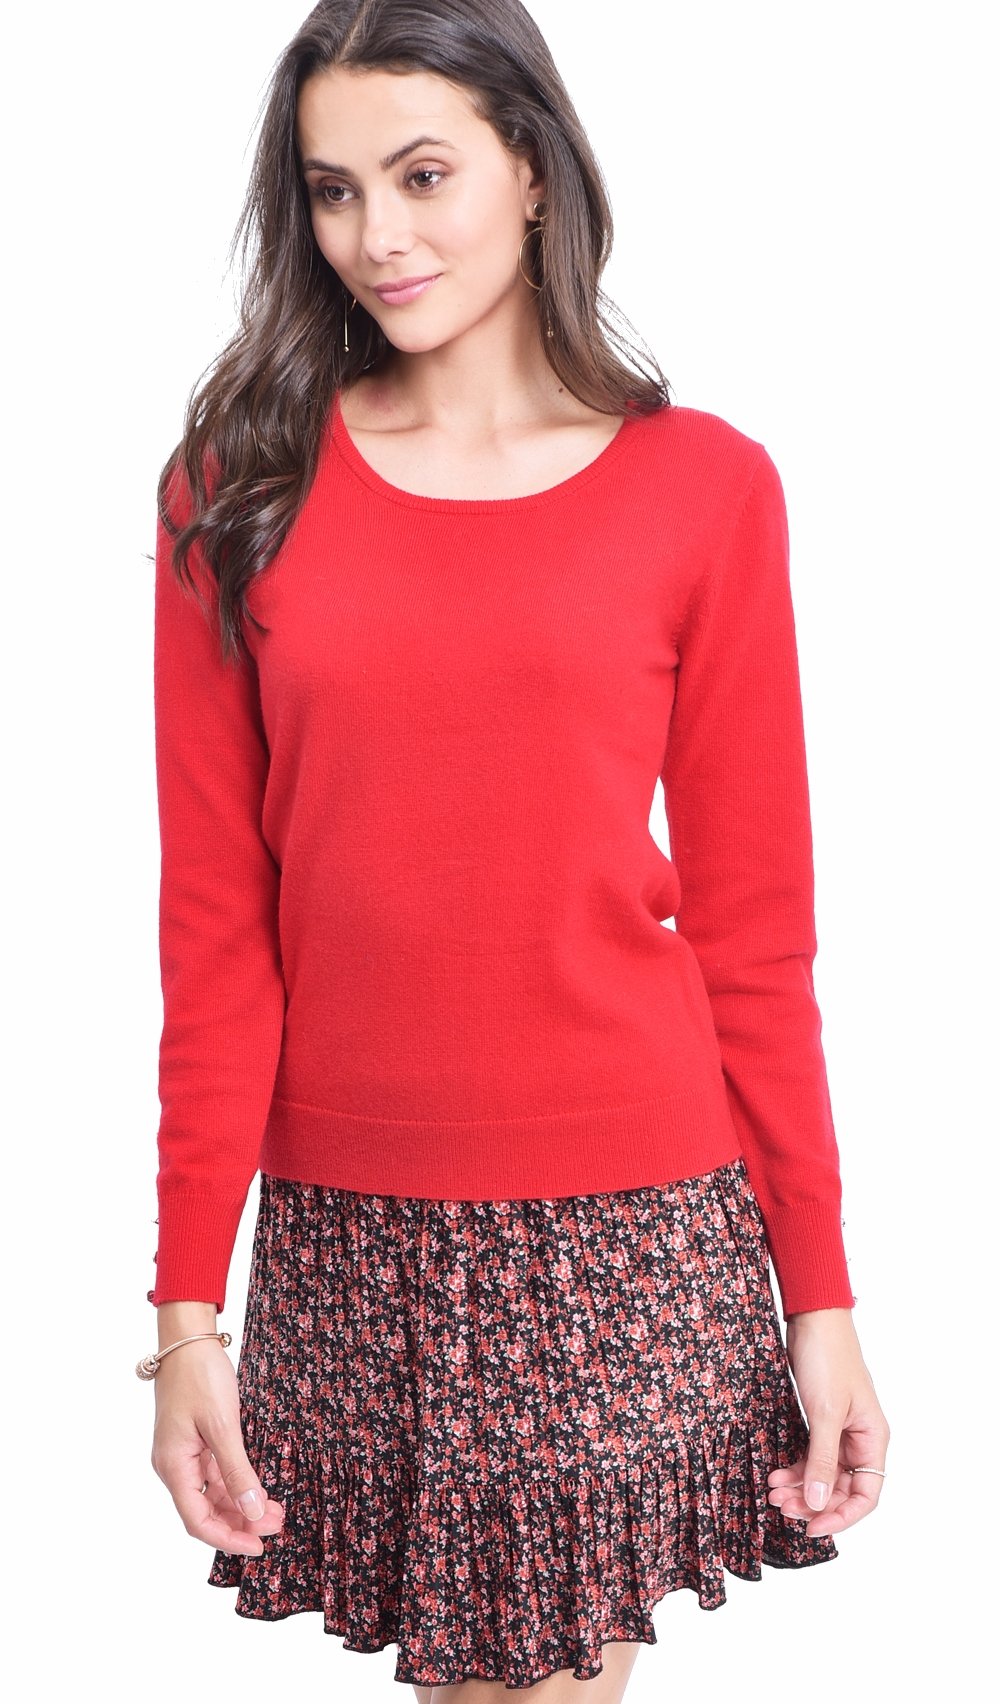 ROUND COLLAR BASIC SWEATER WITH BUTTONS ON SLEEVES